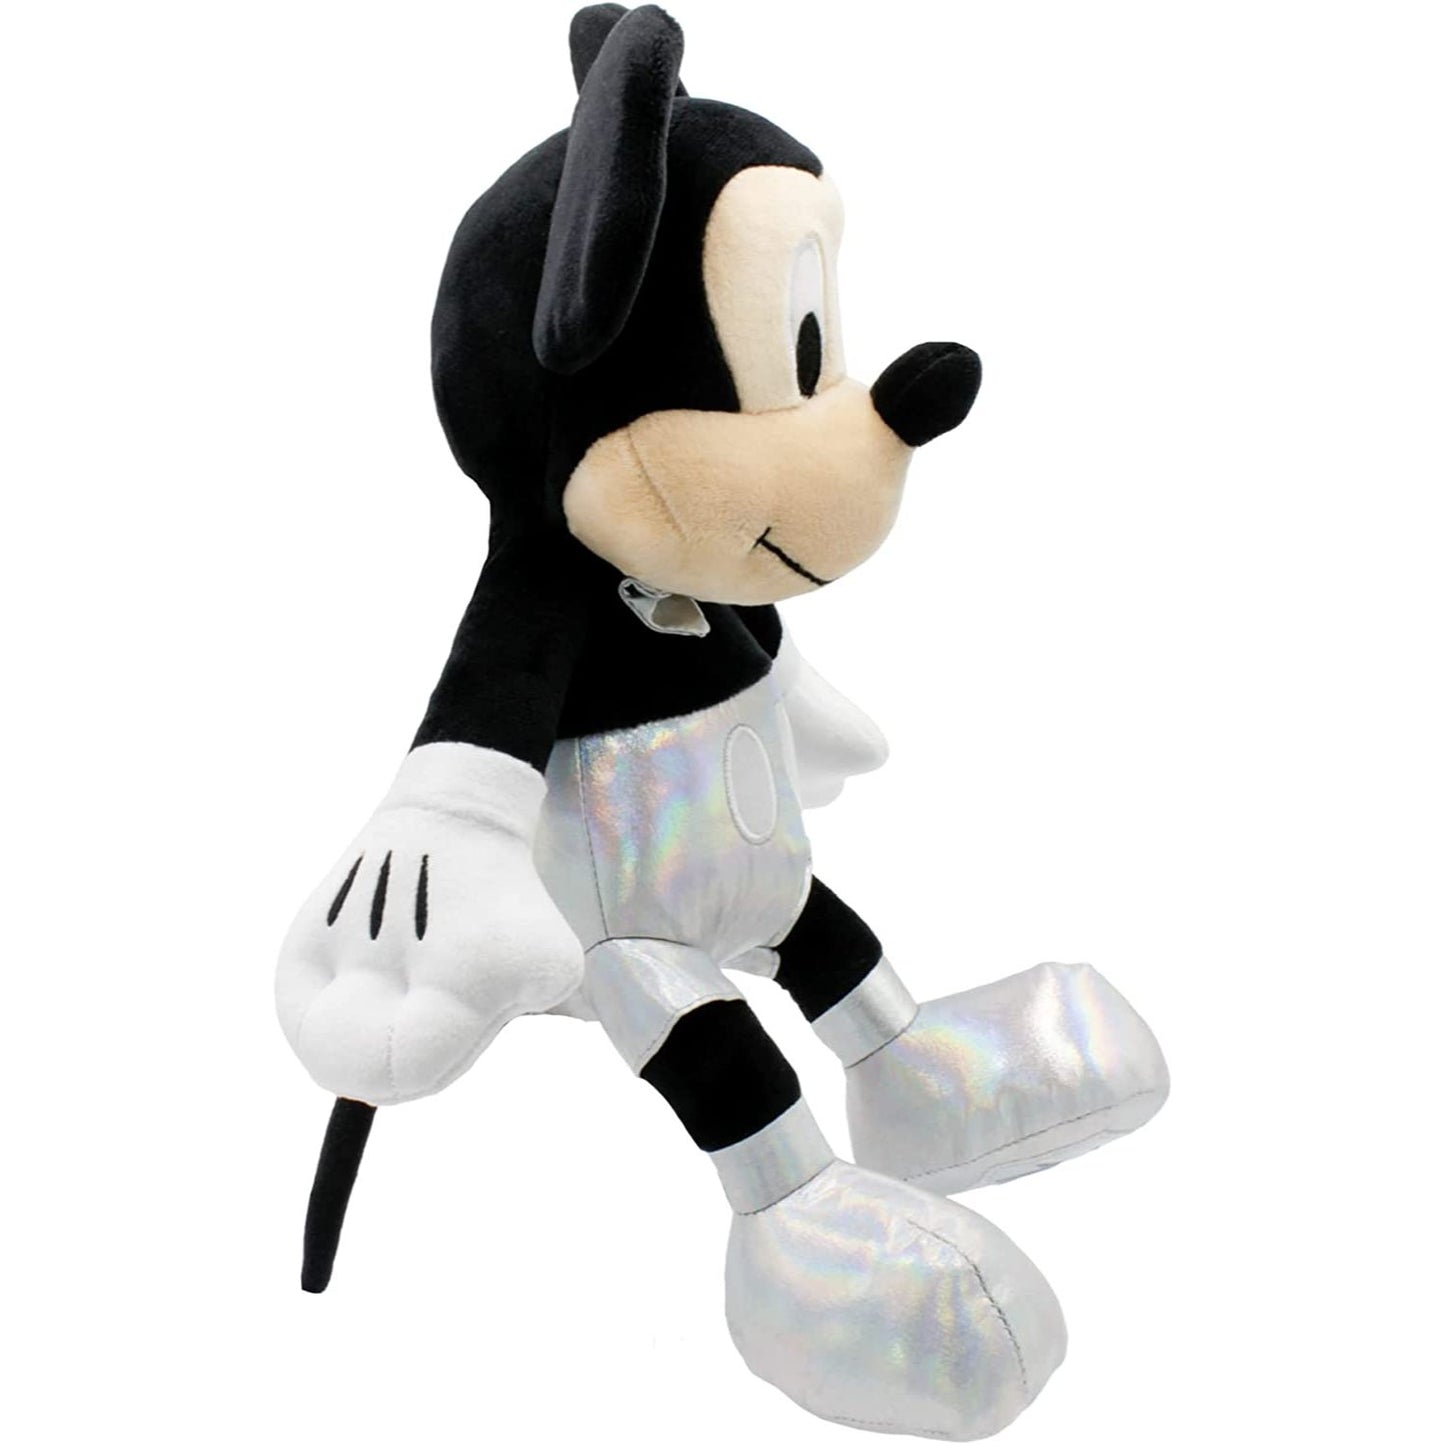 Disney - 100th Celebration - Exclusive Mickey Mouse 14In Push - Heretoserveyou